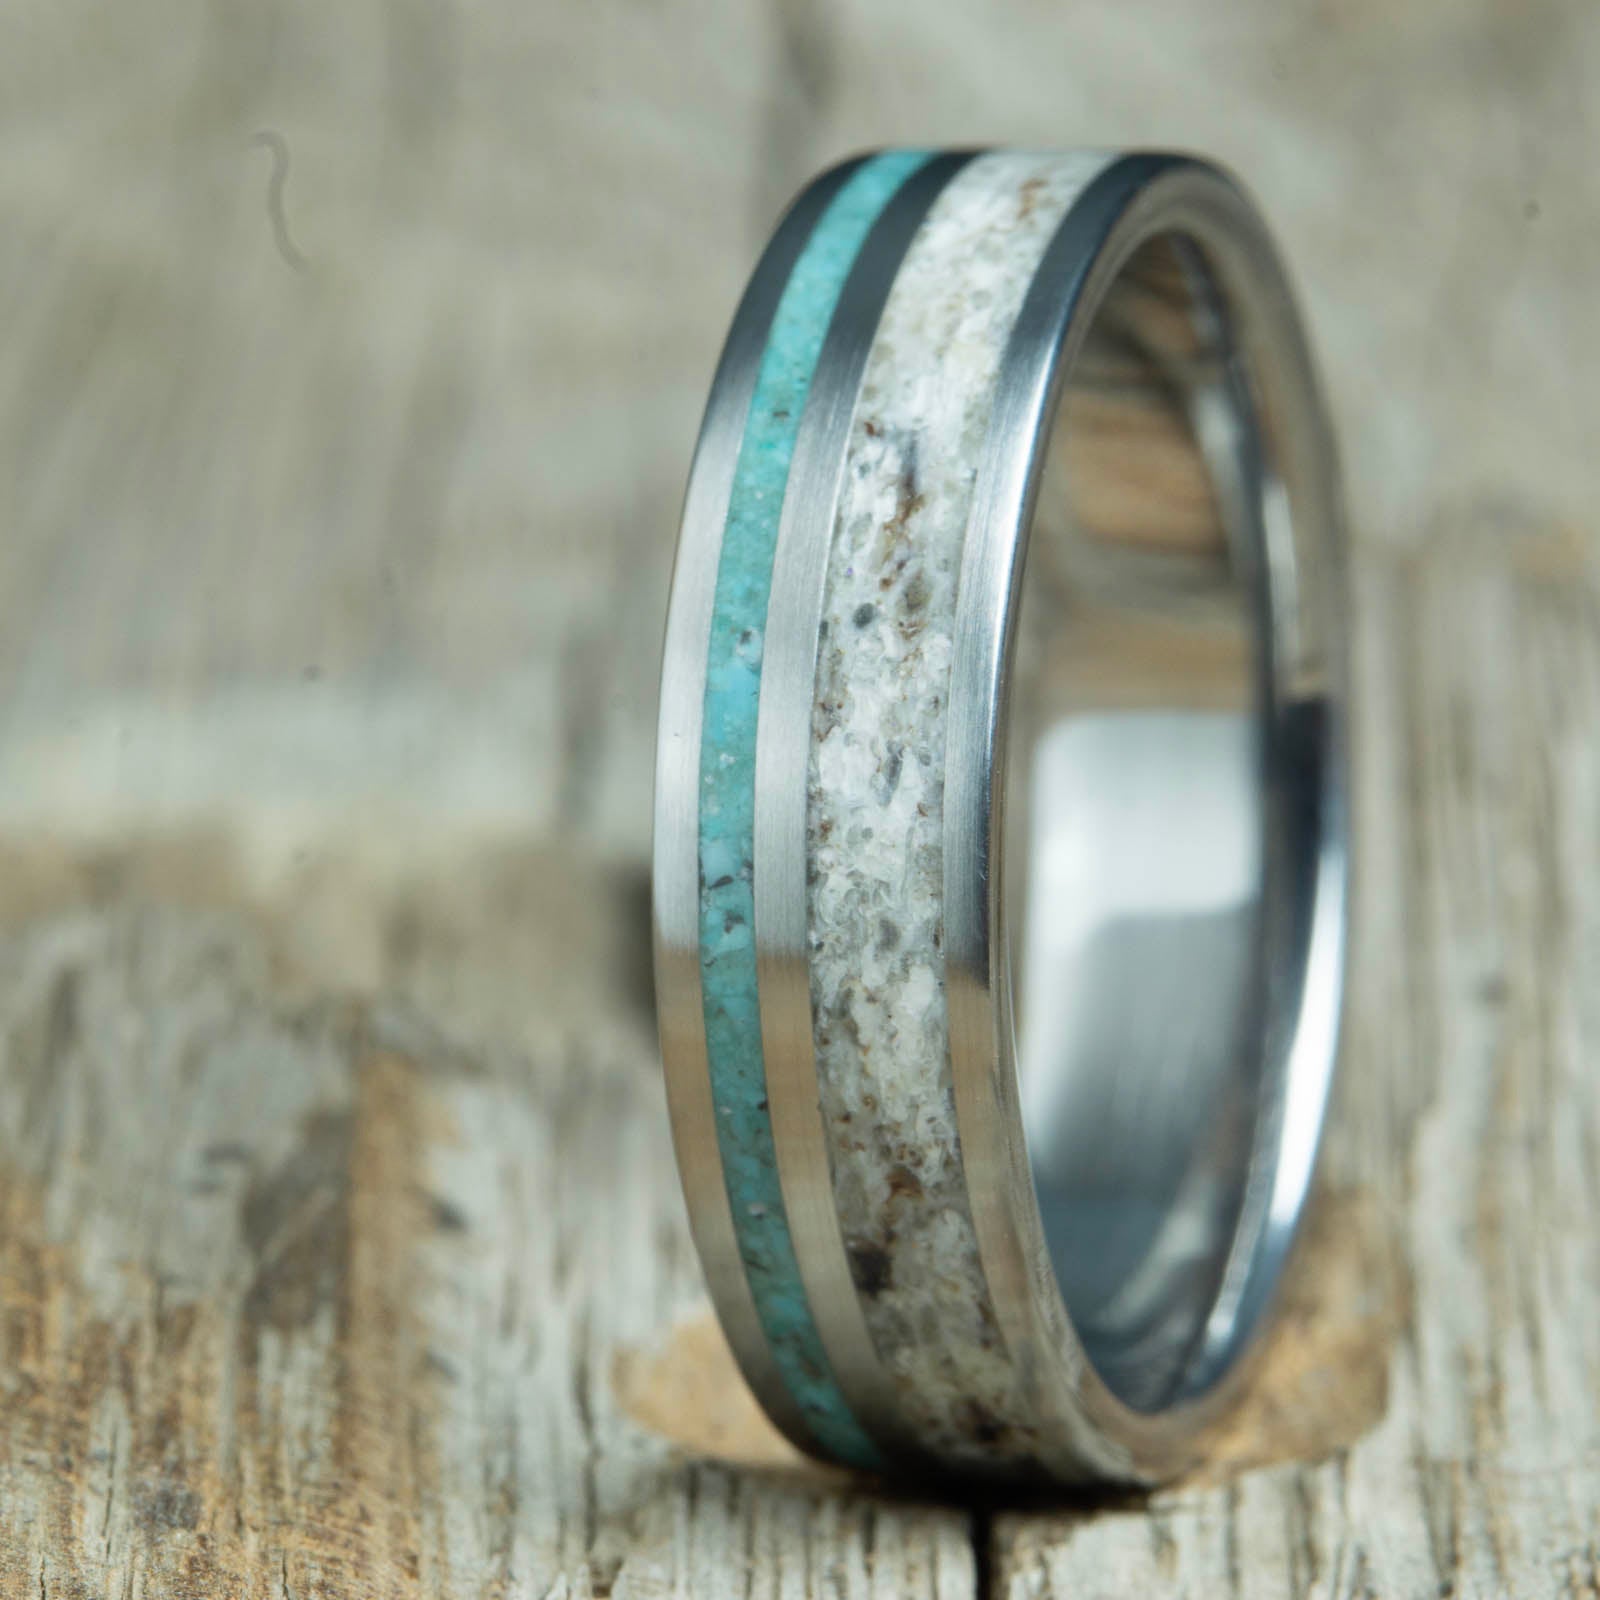 Antler ring with offset turquoise stone inlay